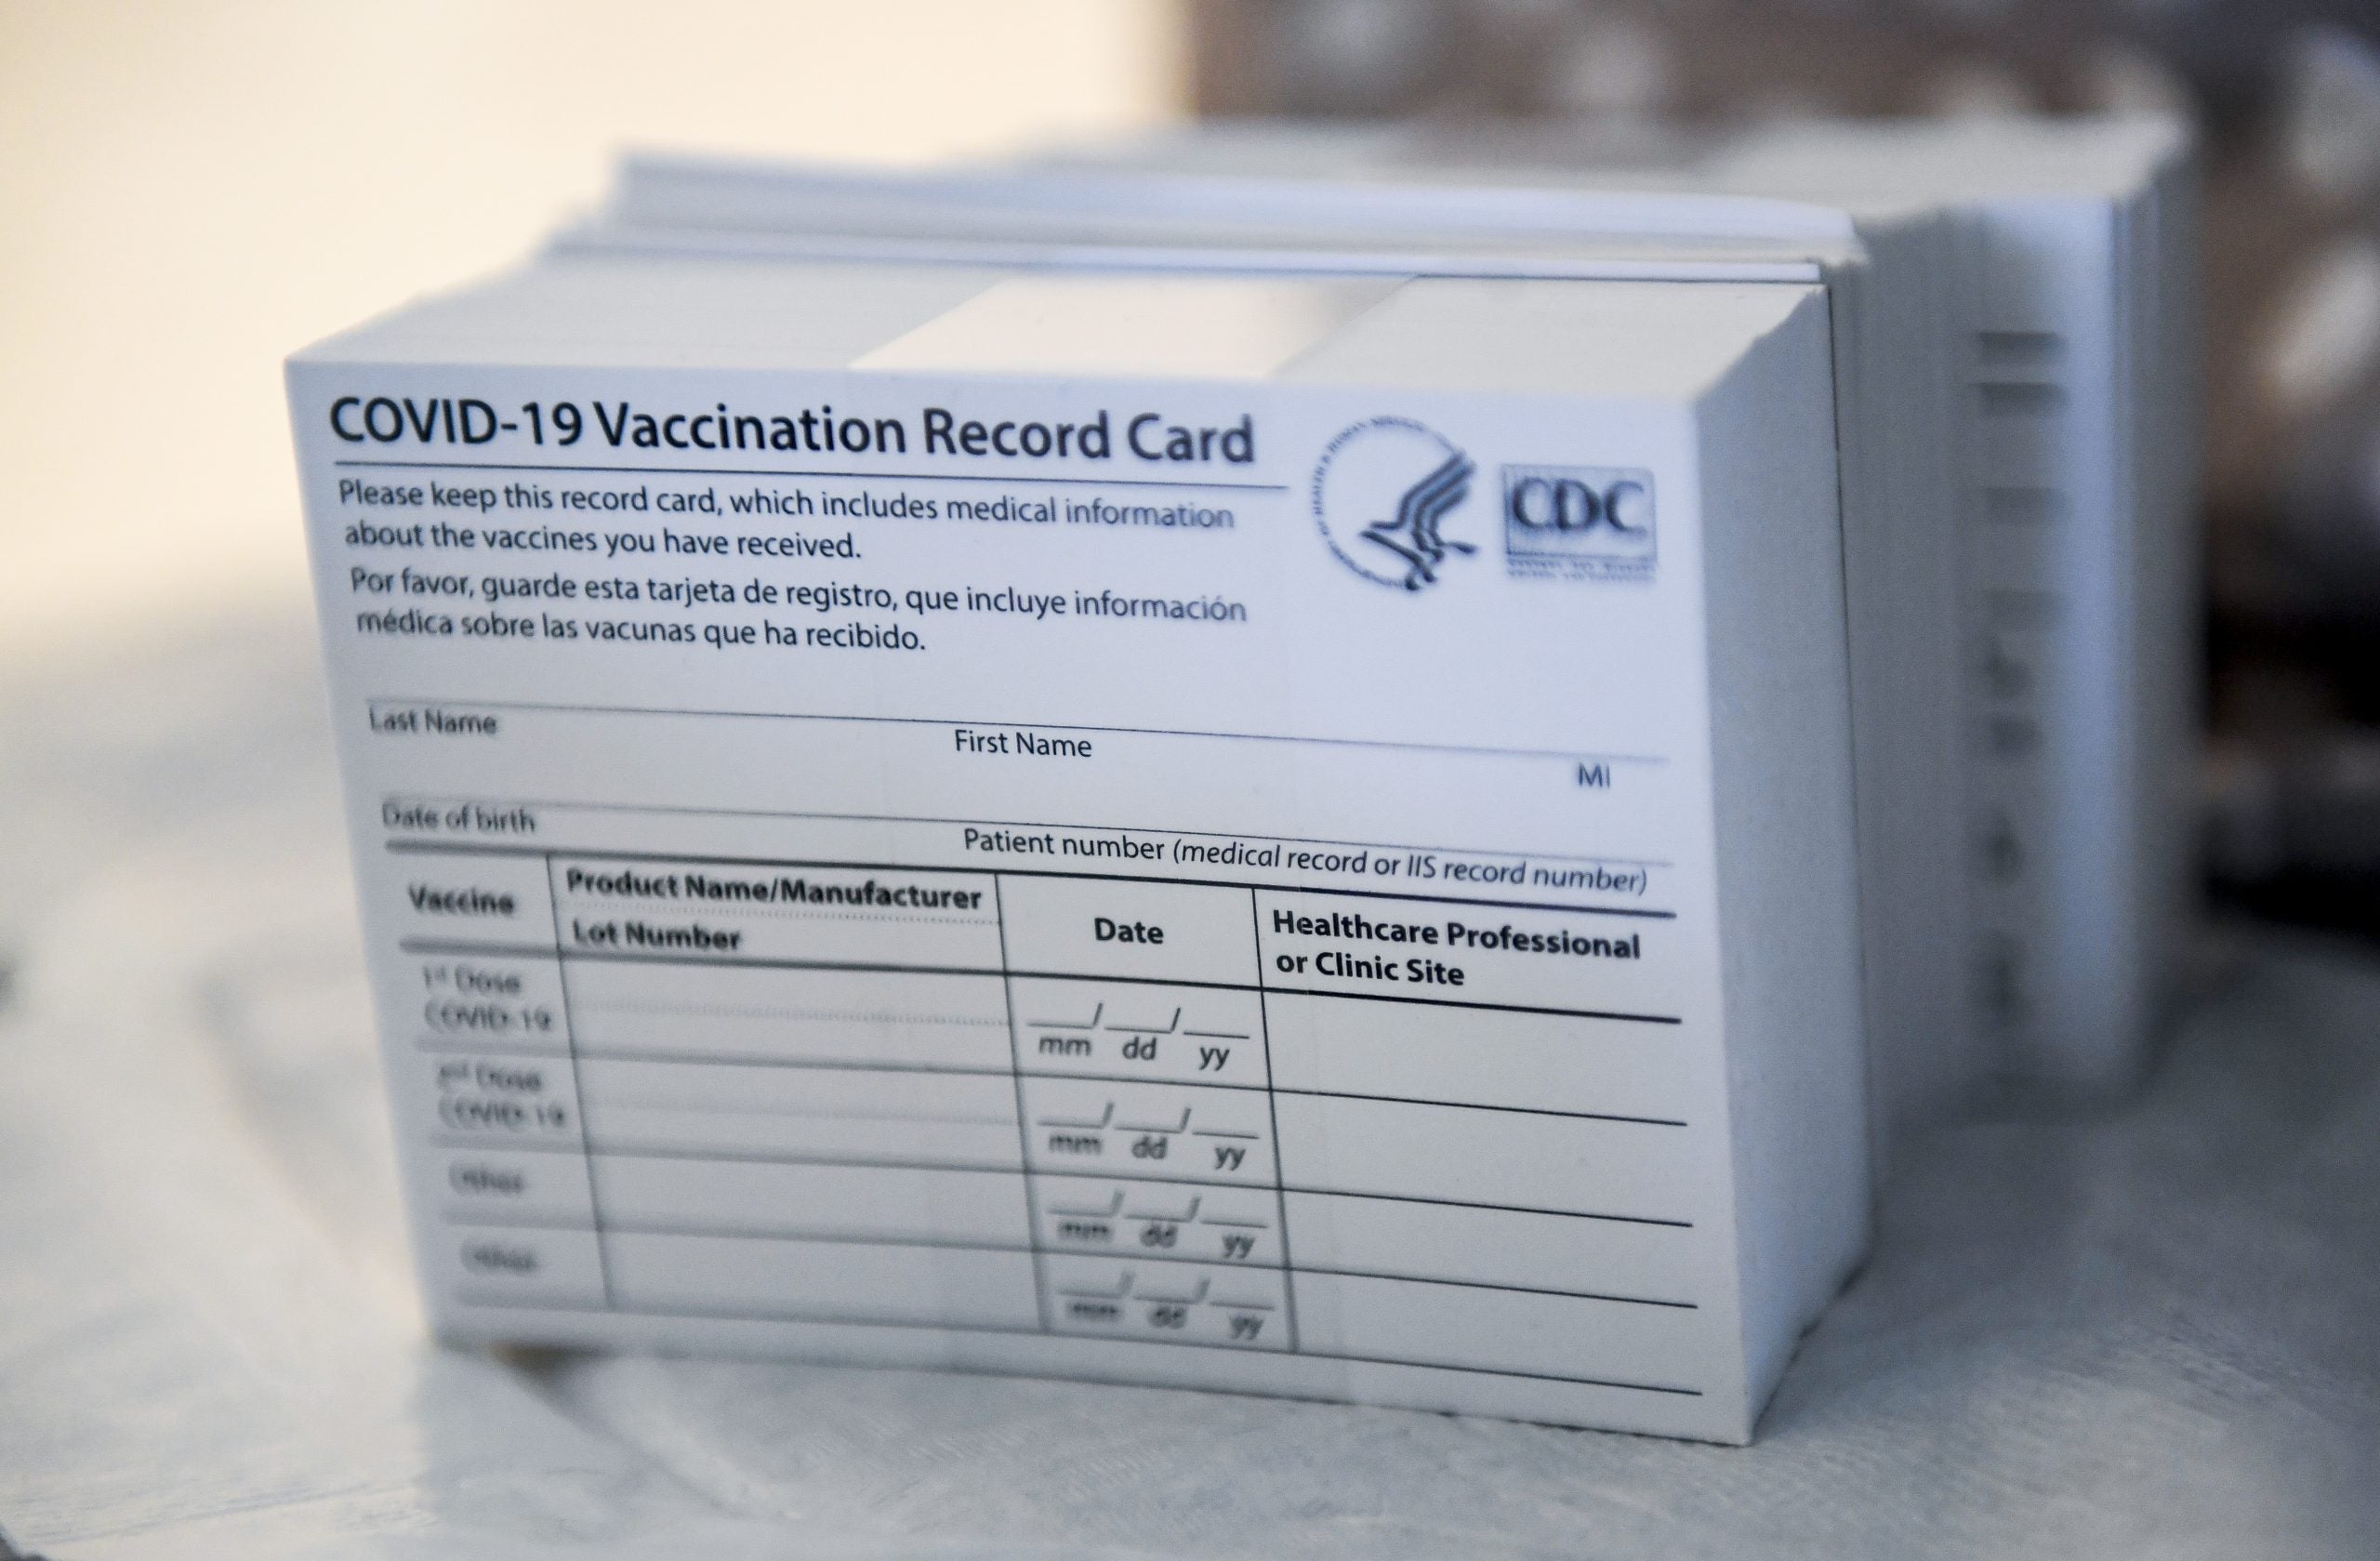 U.S. Border Patrol Has Seized Thousands of Fake COVID-19 Vaccination Cards